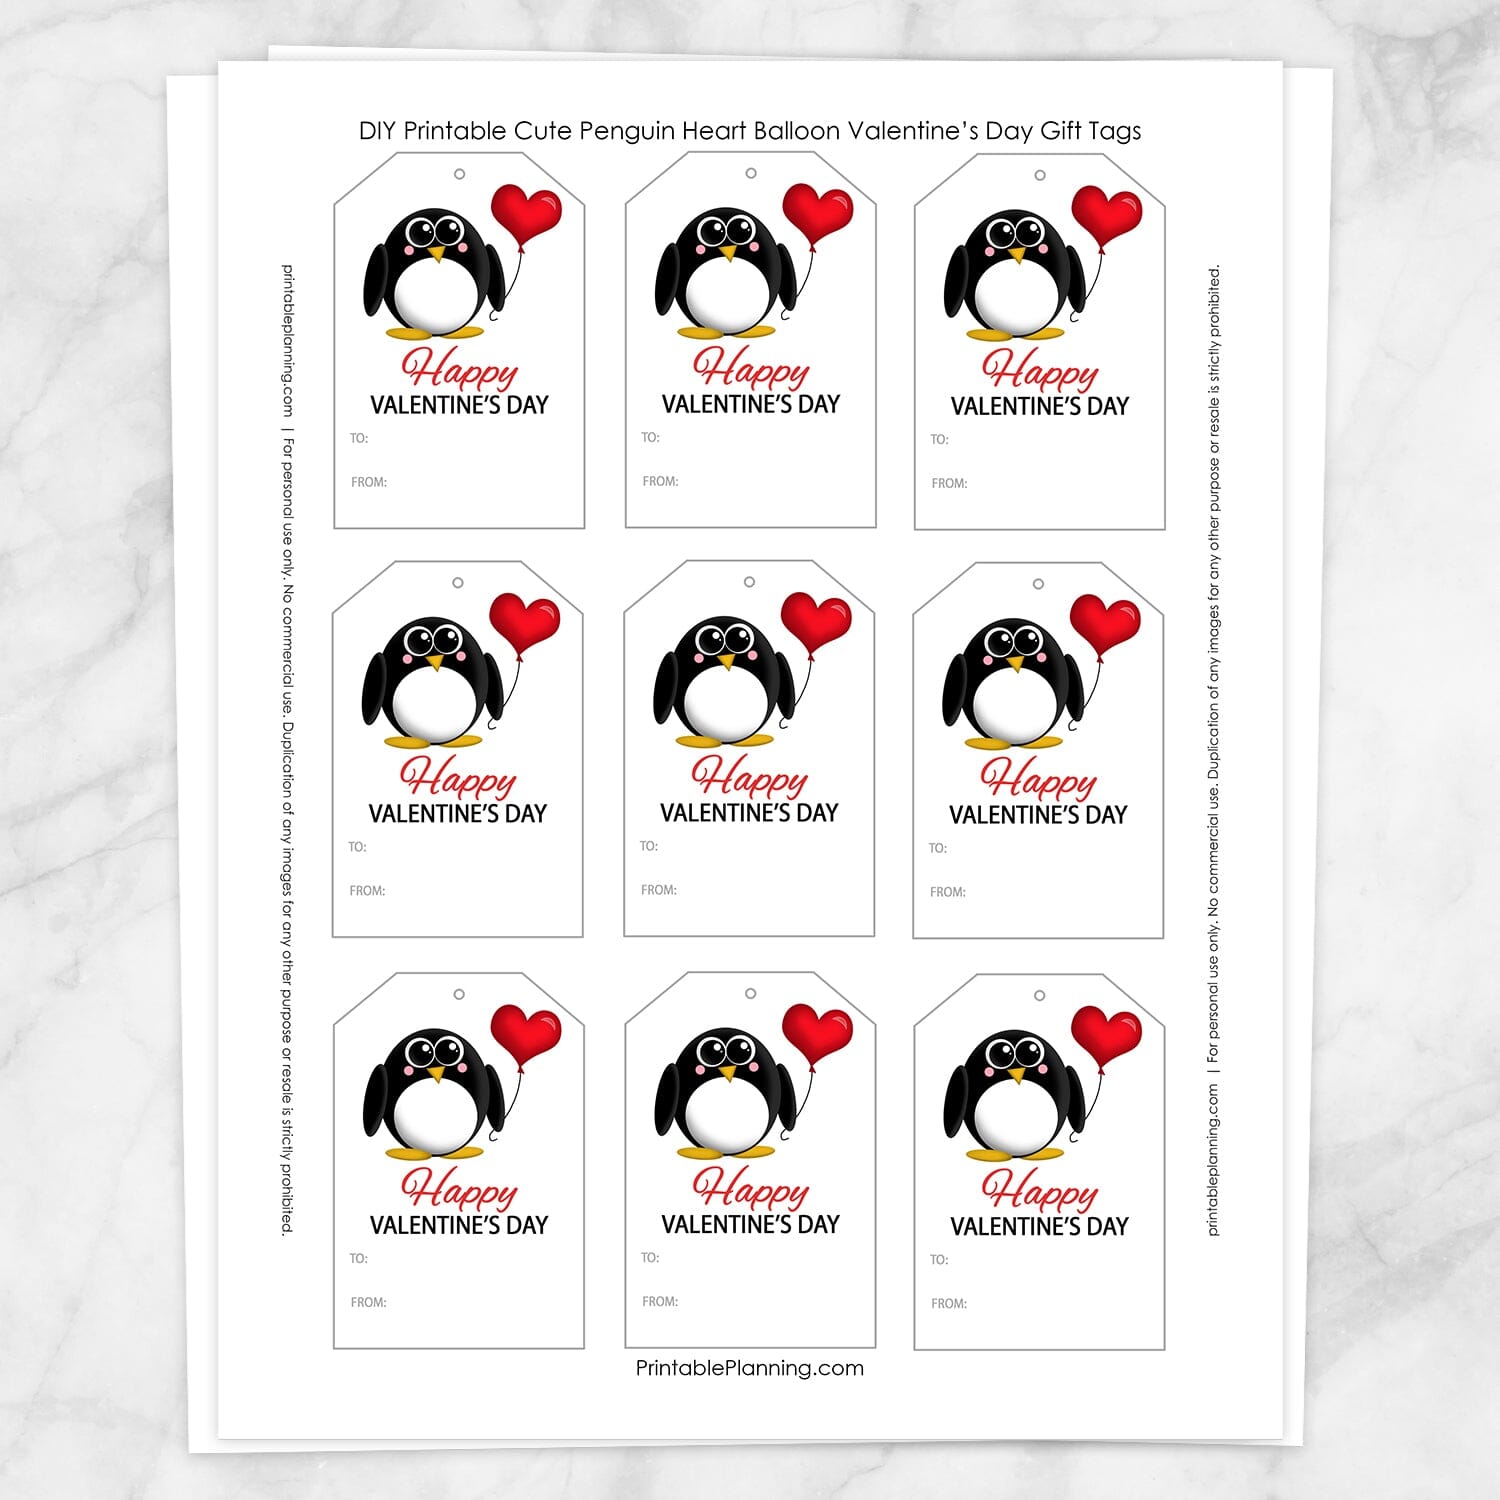 Printable Cute Penguin Heart Balloon Valentine's Day Gift Tags at Printable Planning. Sheet of 9 gift tags.